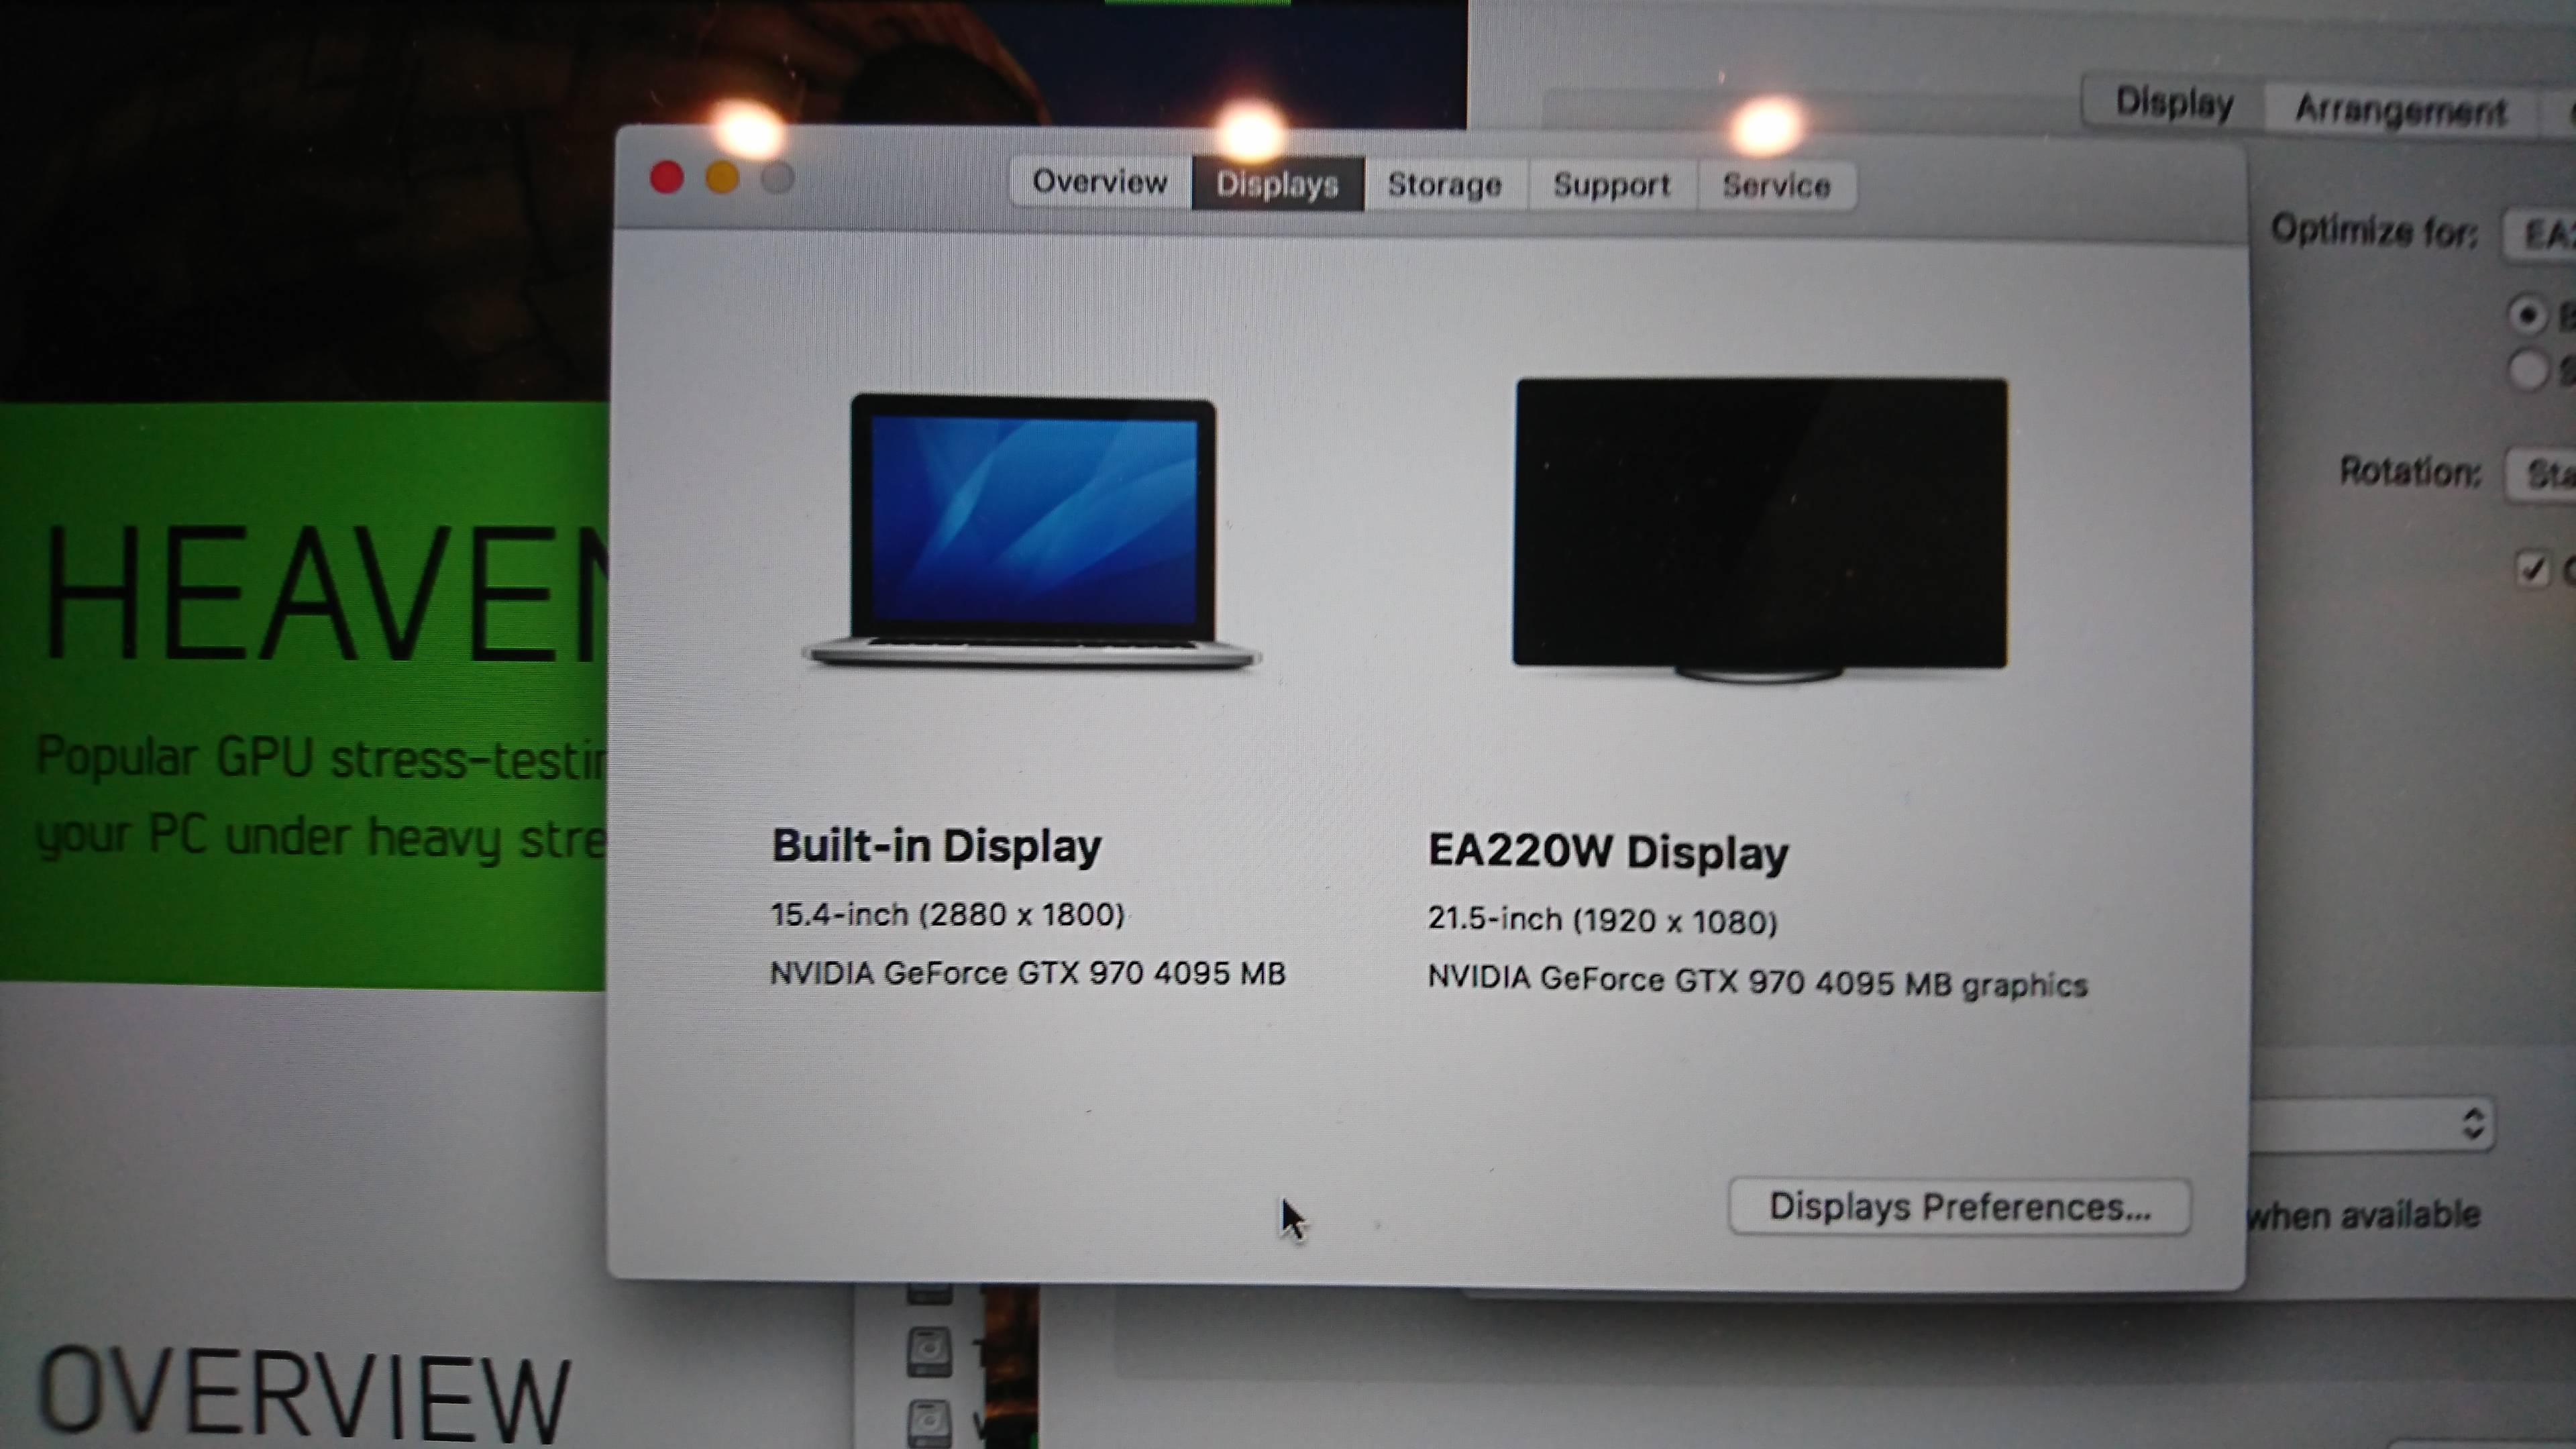 for mac os x 10.12 should i download zip or gz?